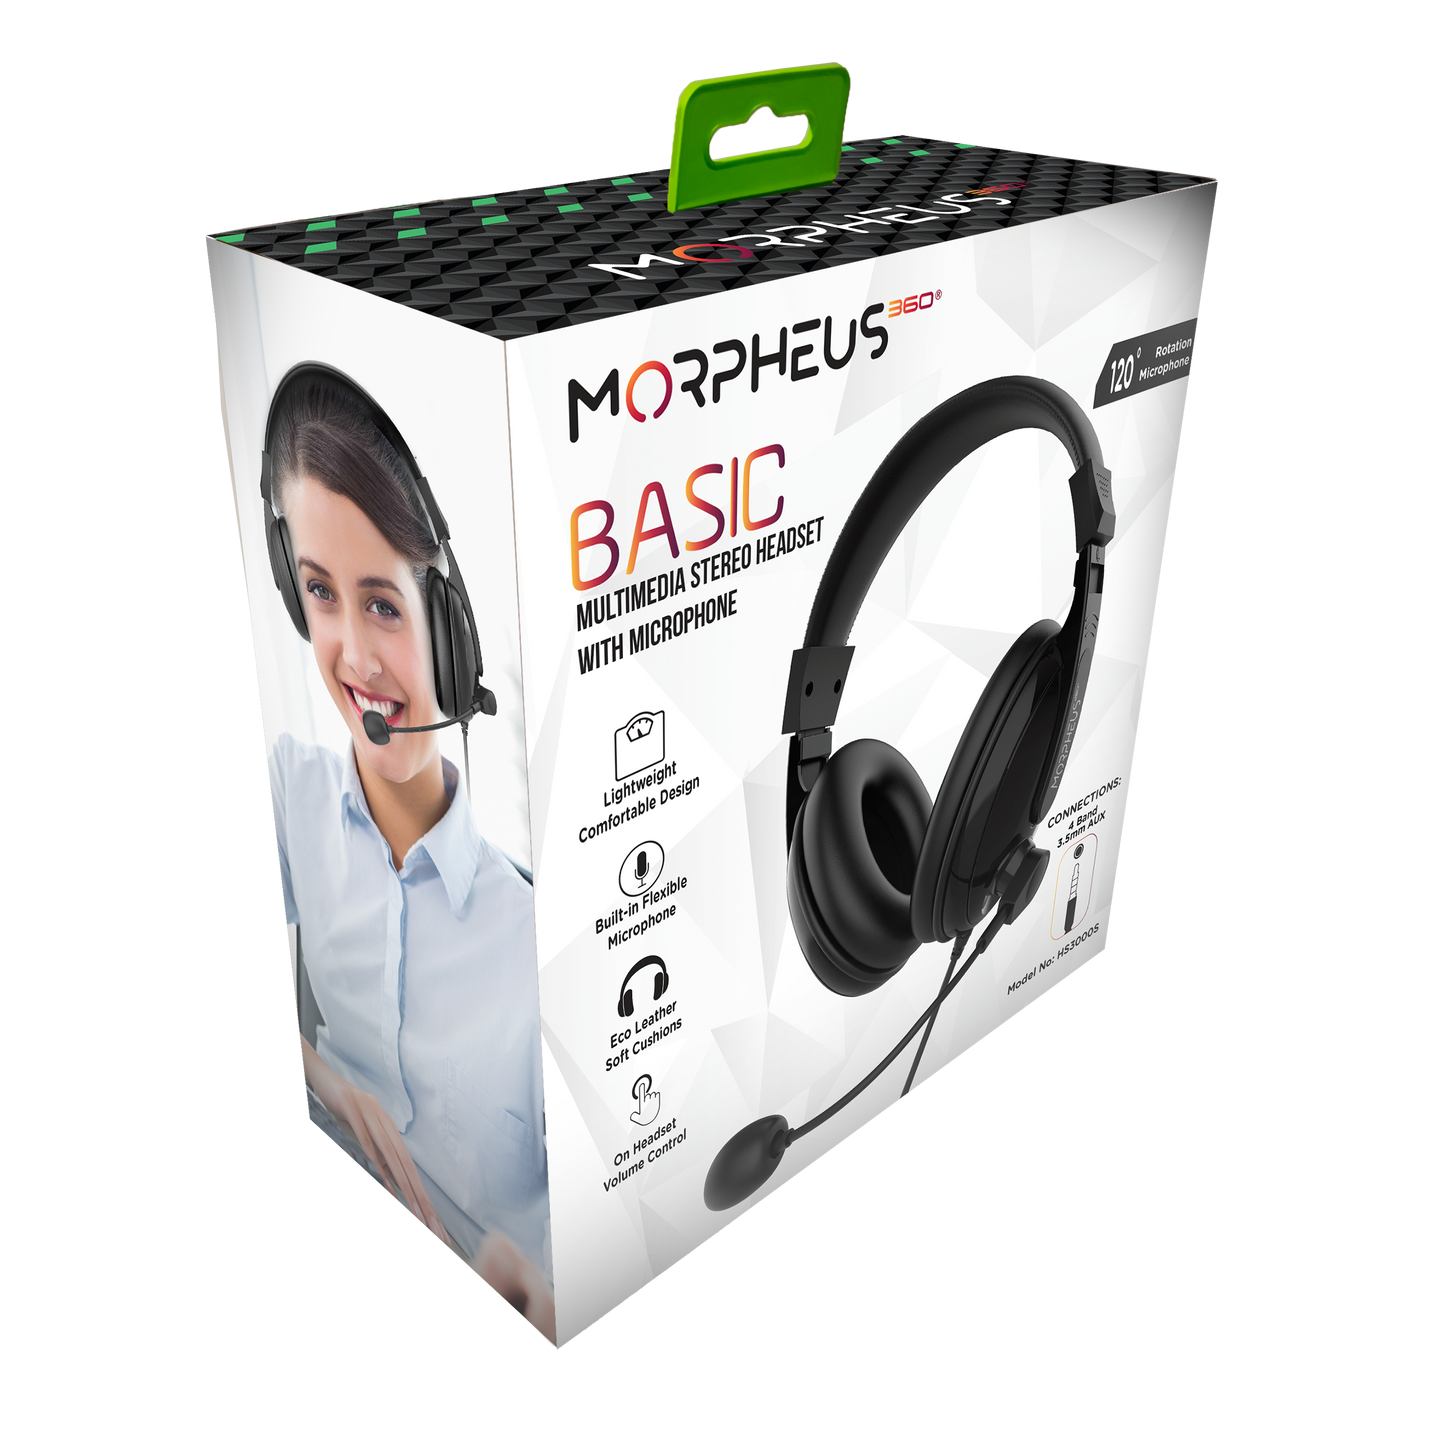 Front angled picture of the Morpheus 360 HS3000S Retail Package.